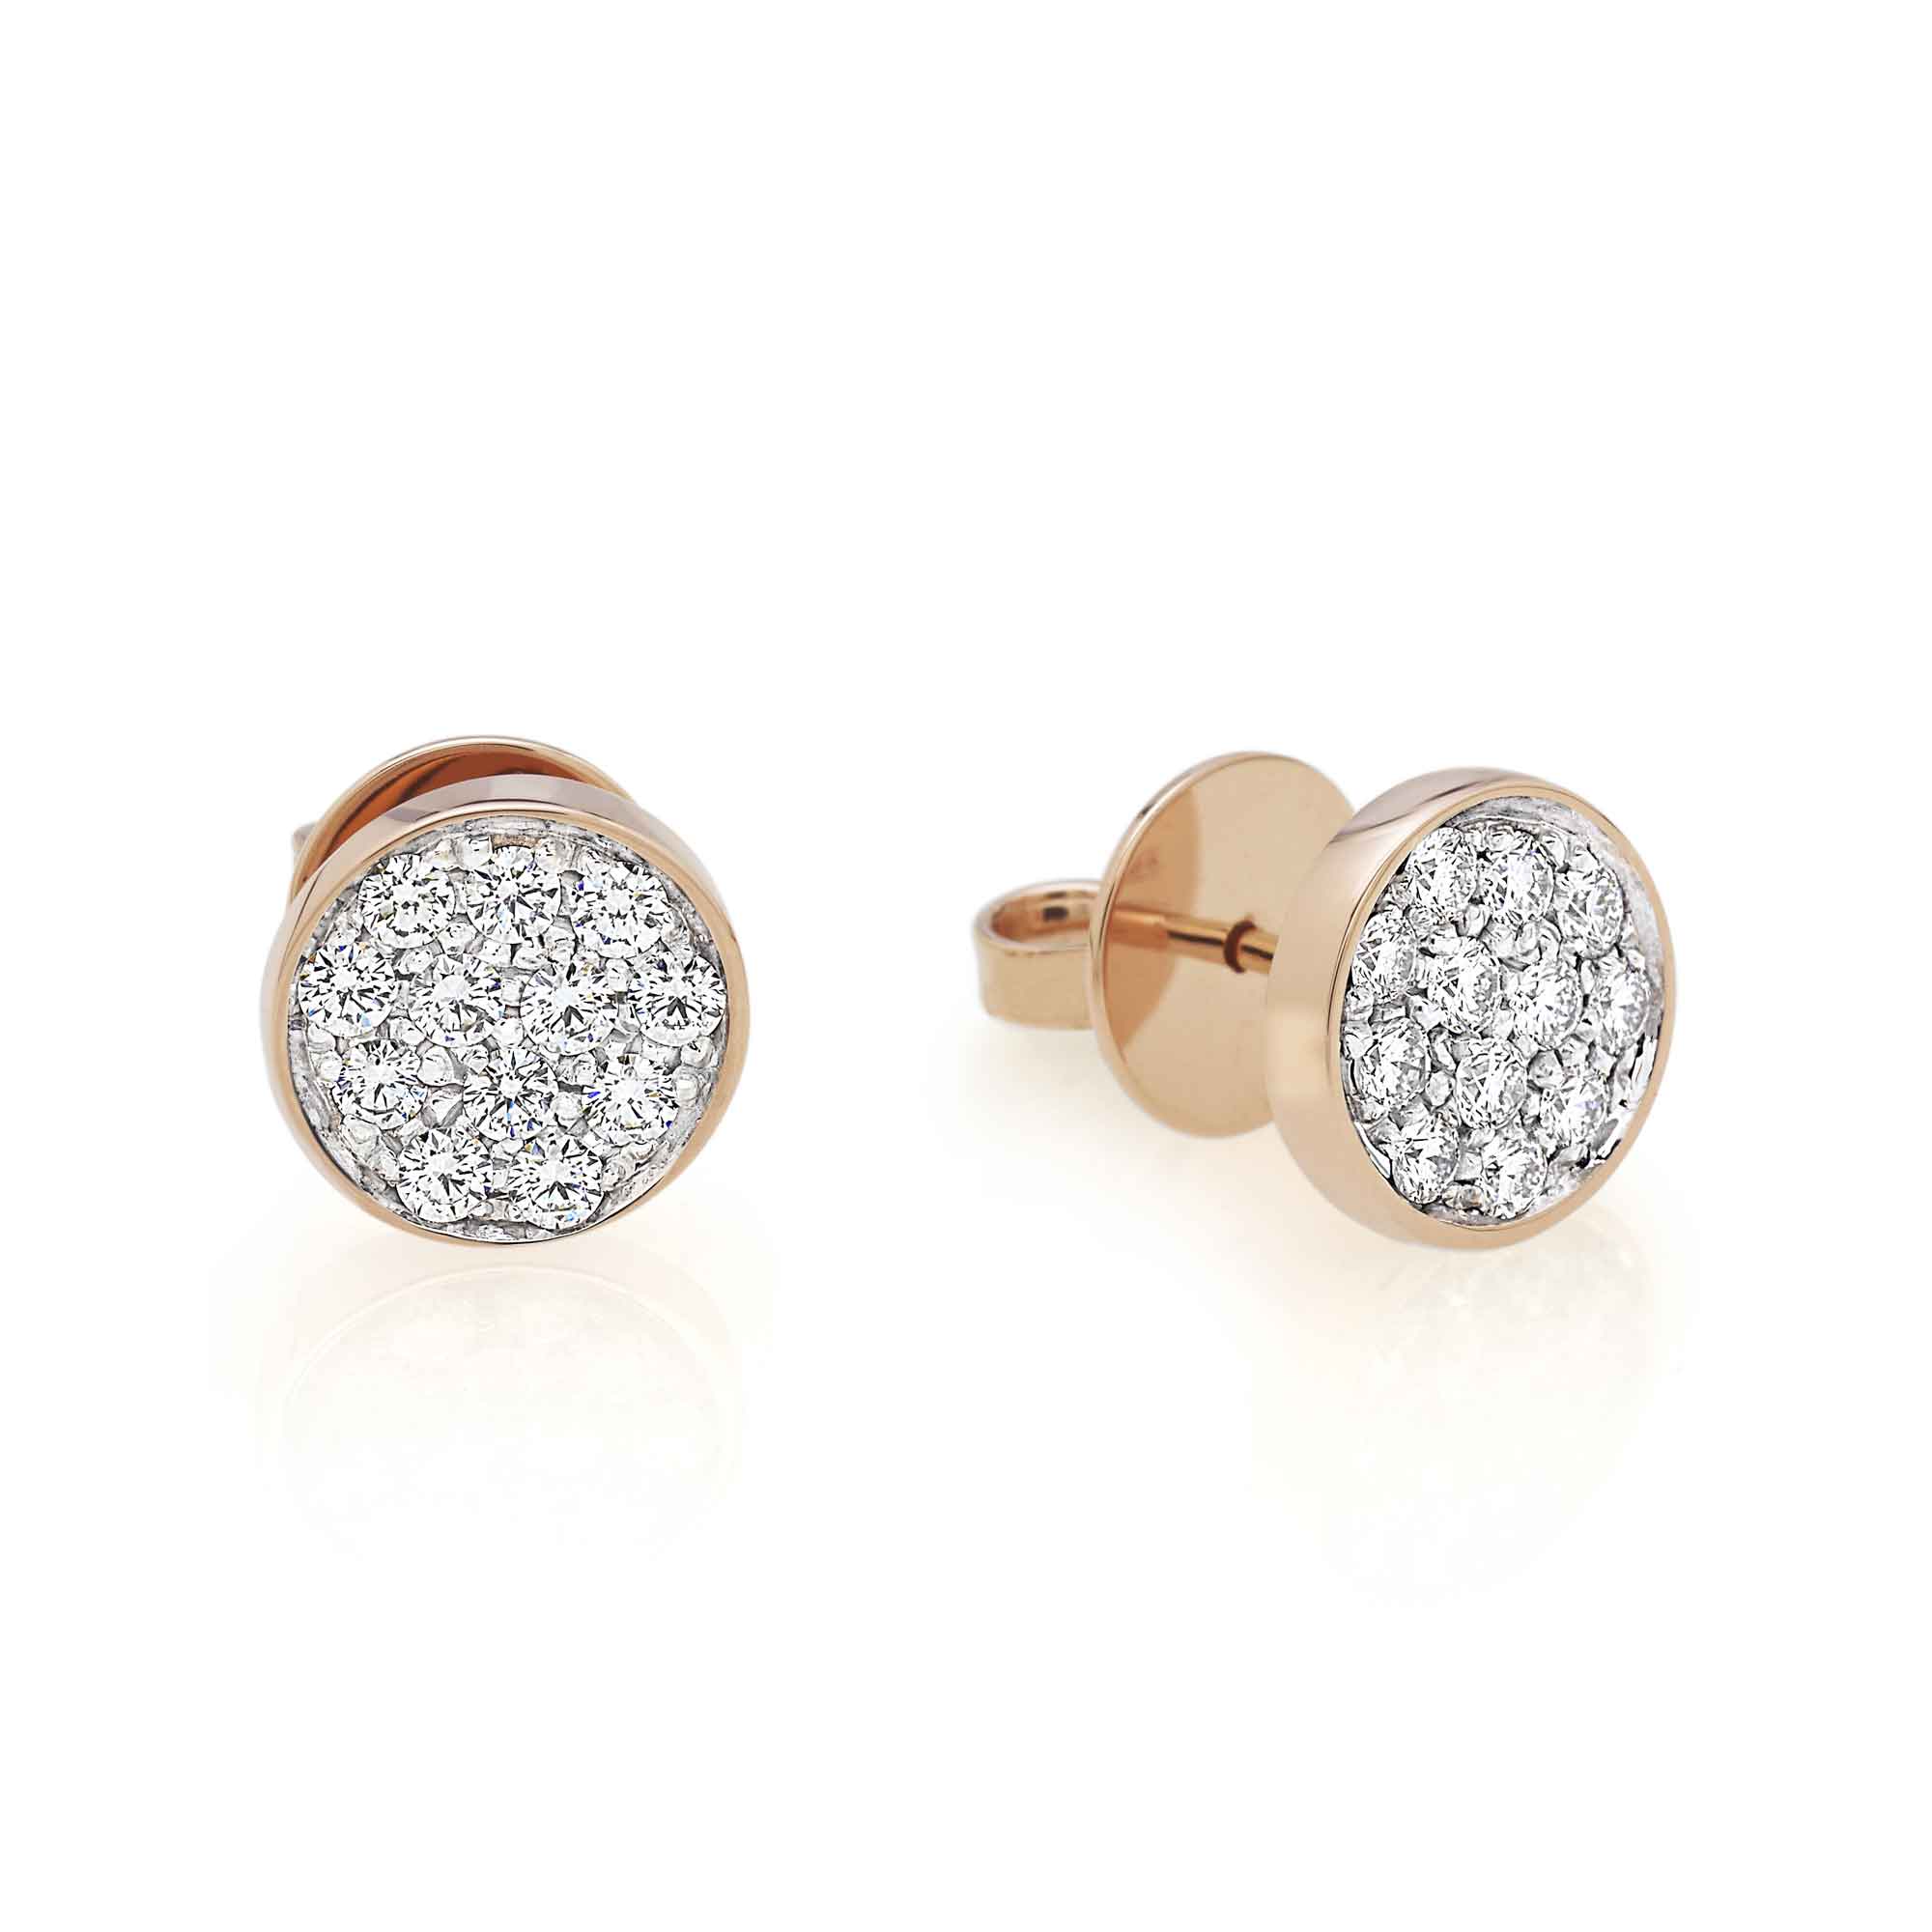 paillettes 10mm earrings in pink gold and diamonds - Fecarotta Gioielli